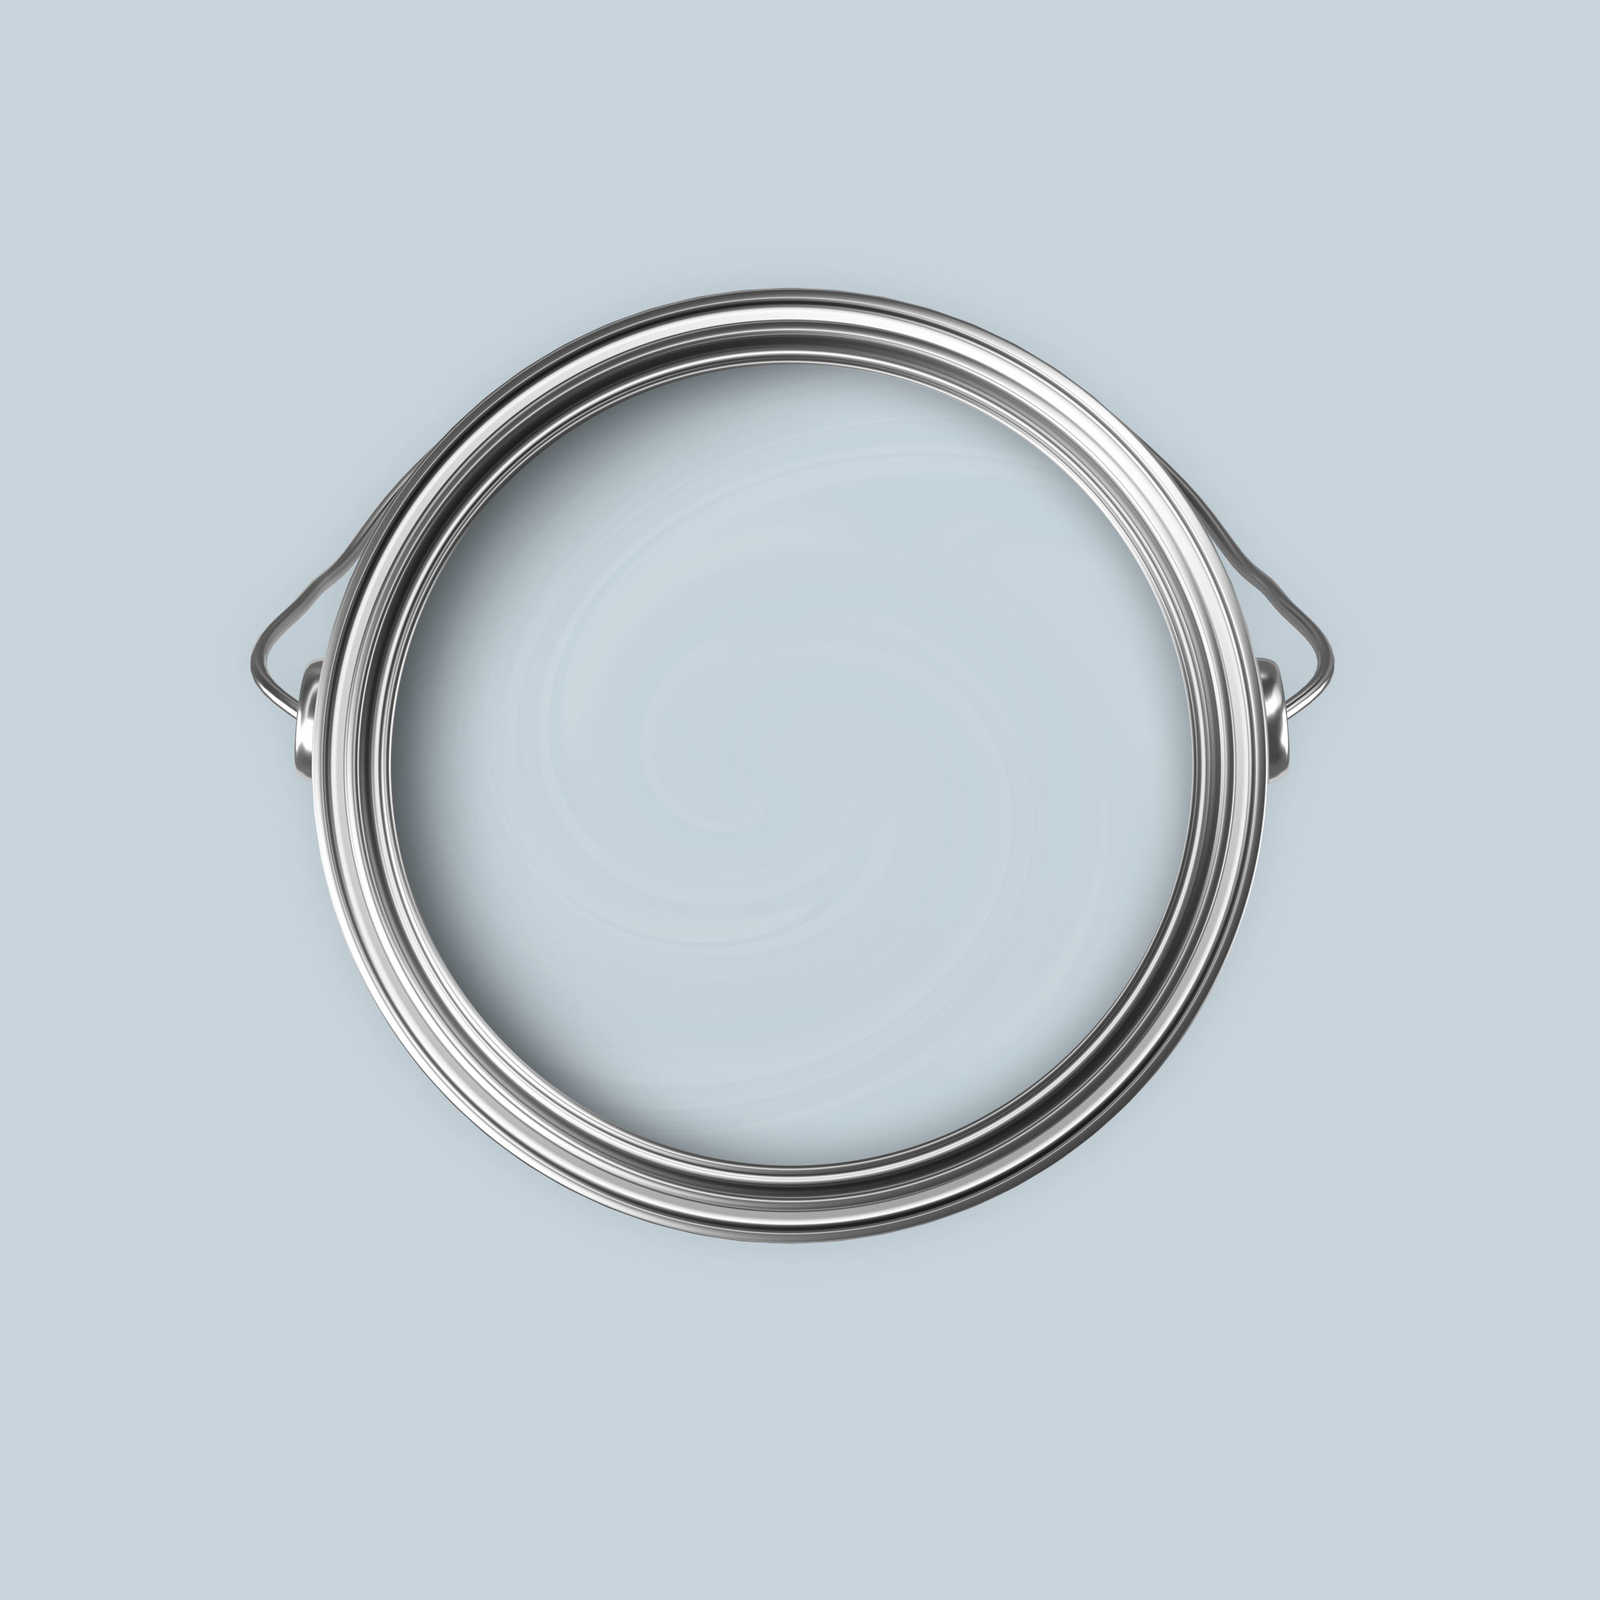             Premium Wall Paint Fresh Baby Blue »Blissful Blue« NW303 – 5 litre
        